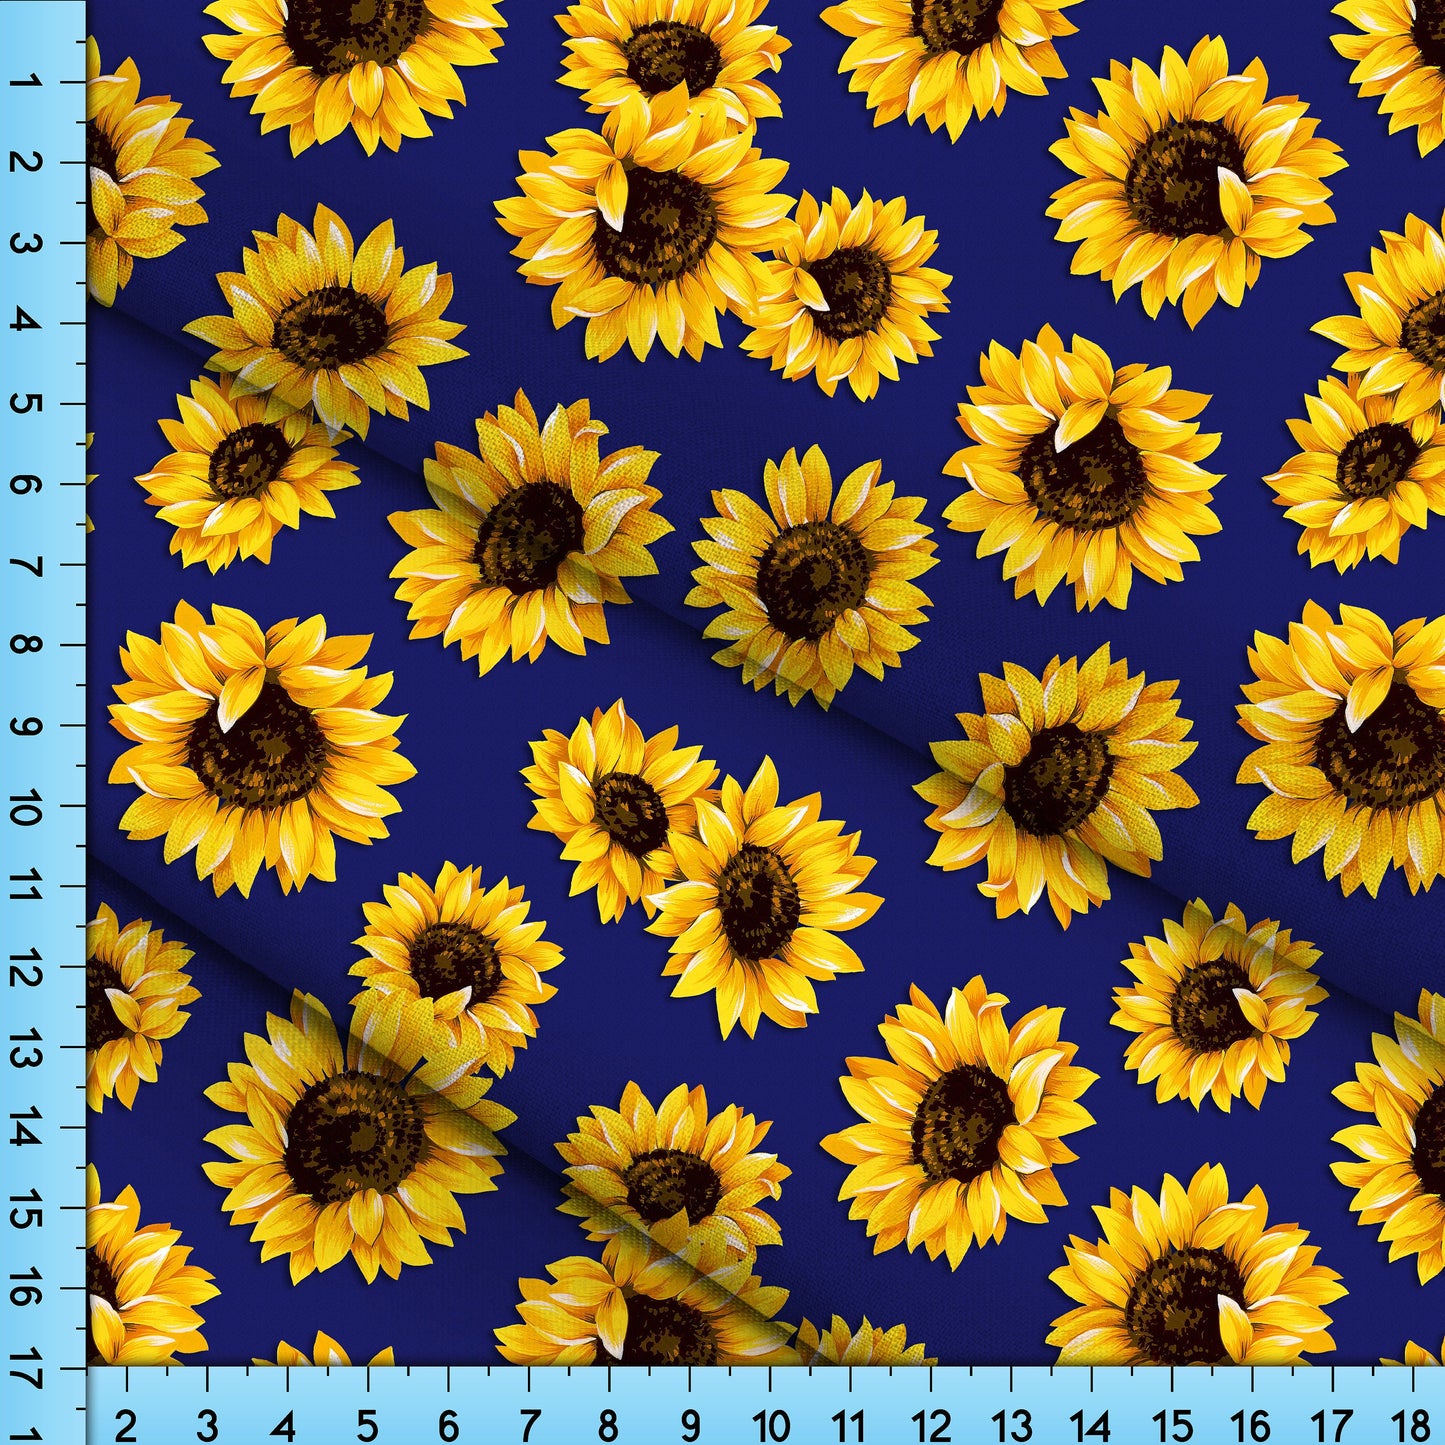 Sunflower Fabric Printed By the Yard on your choice of fabrics, Dark Blue Background,